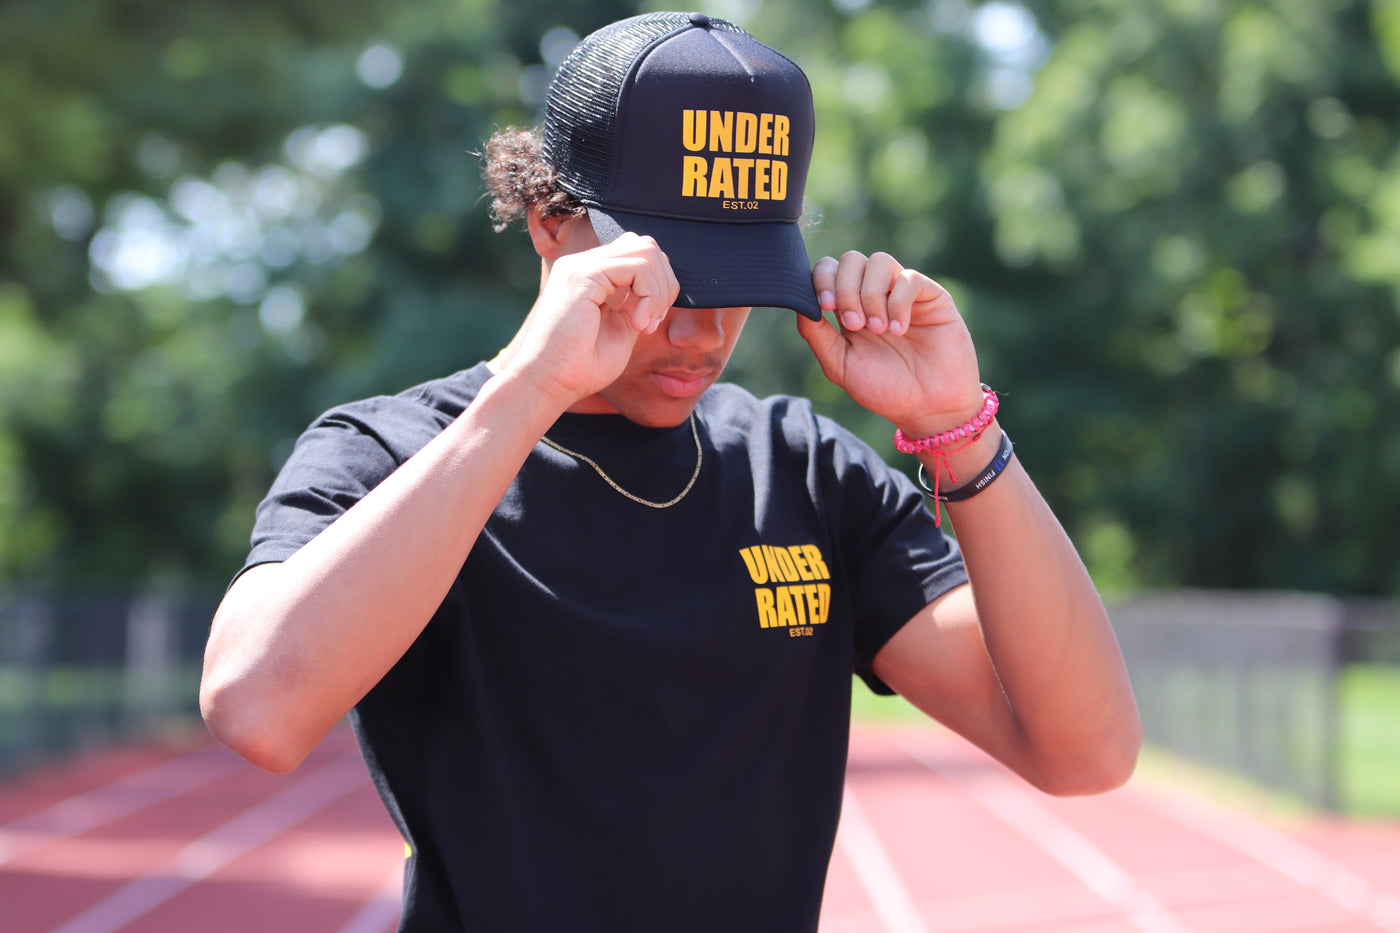 BLACK UNDERRATED TRUCKER HAT WITH YELLOW FONT